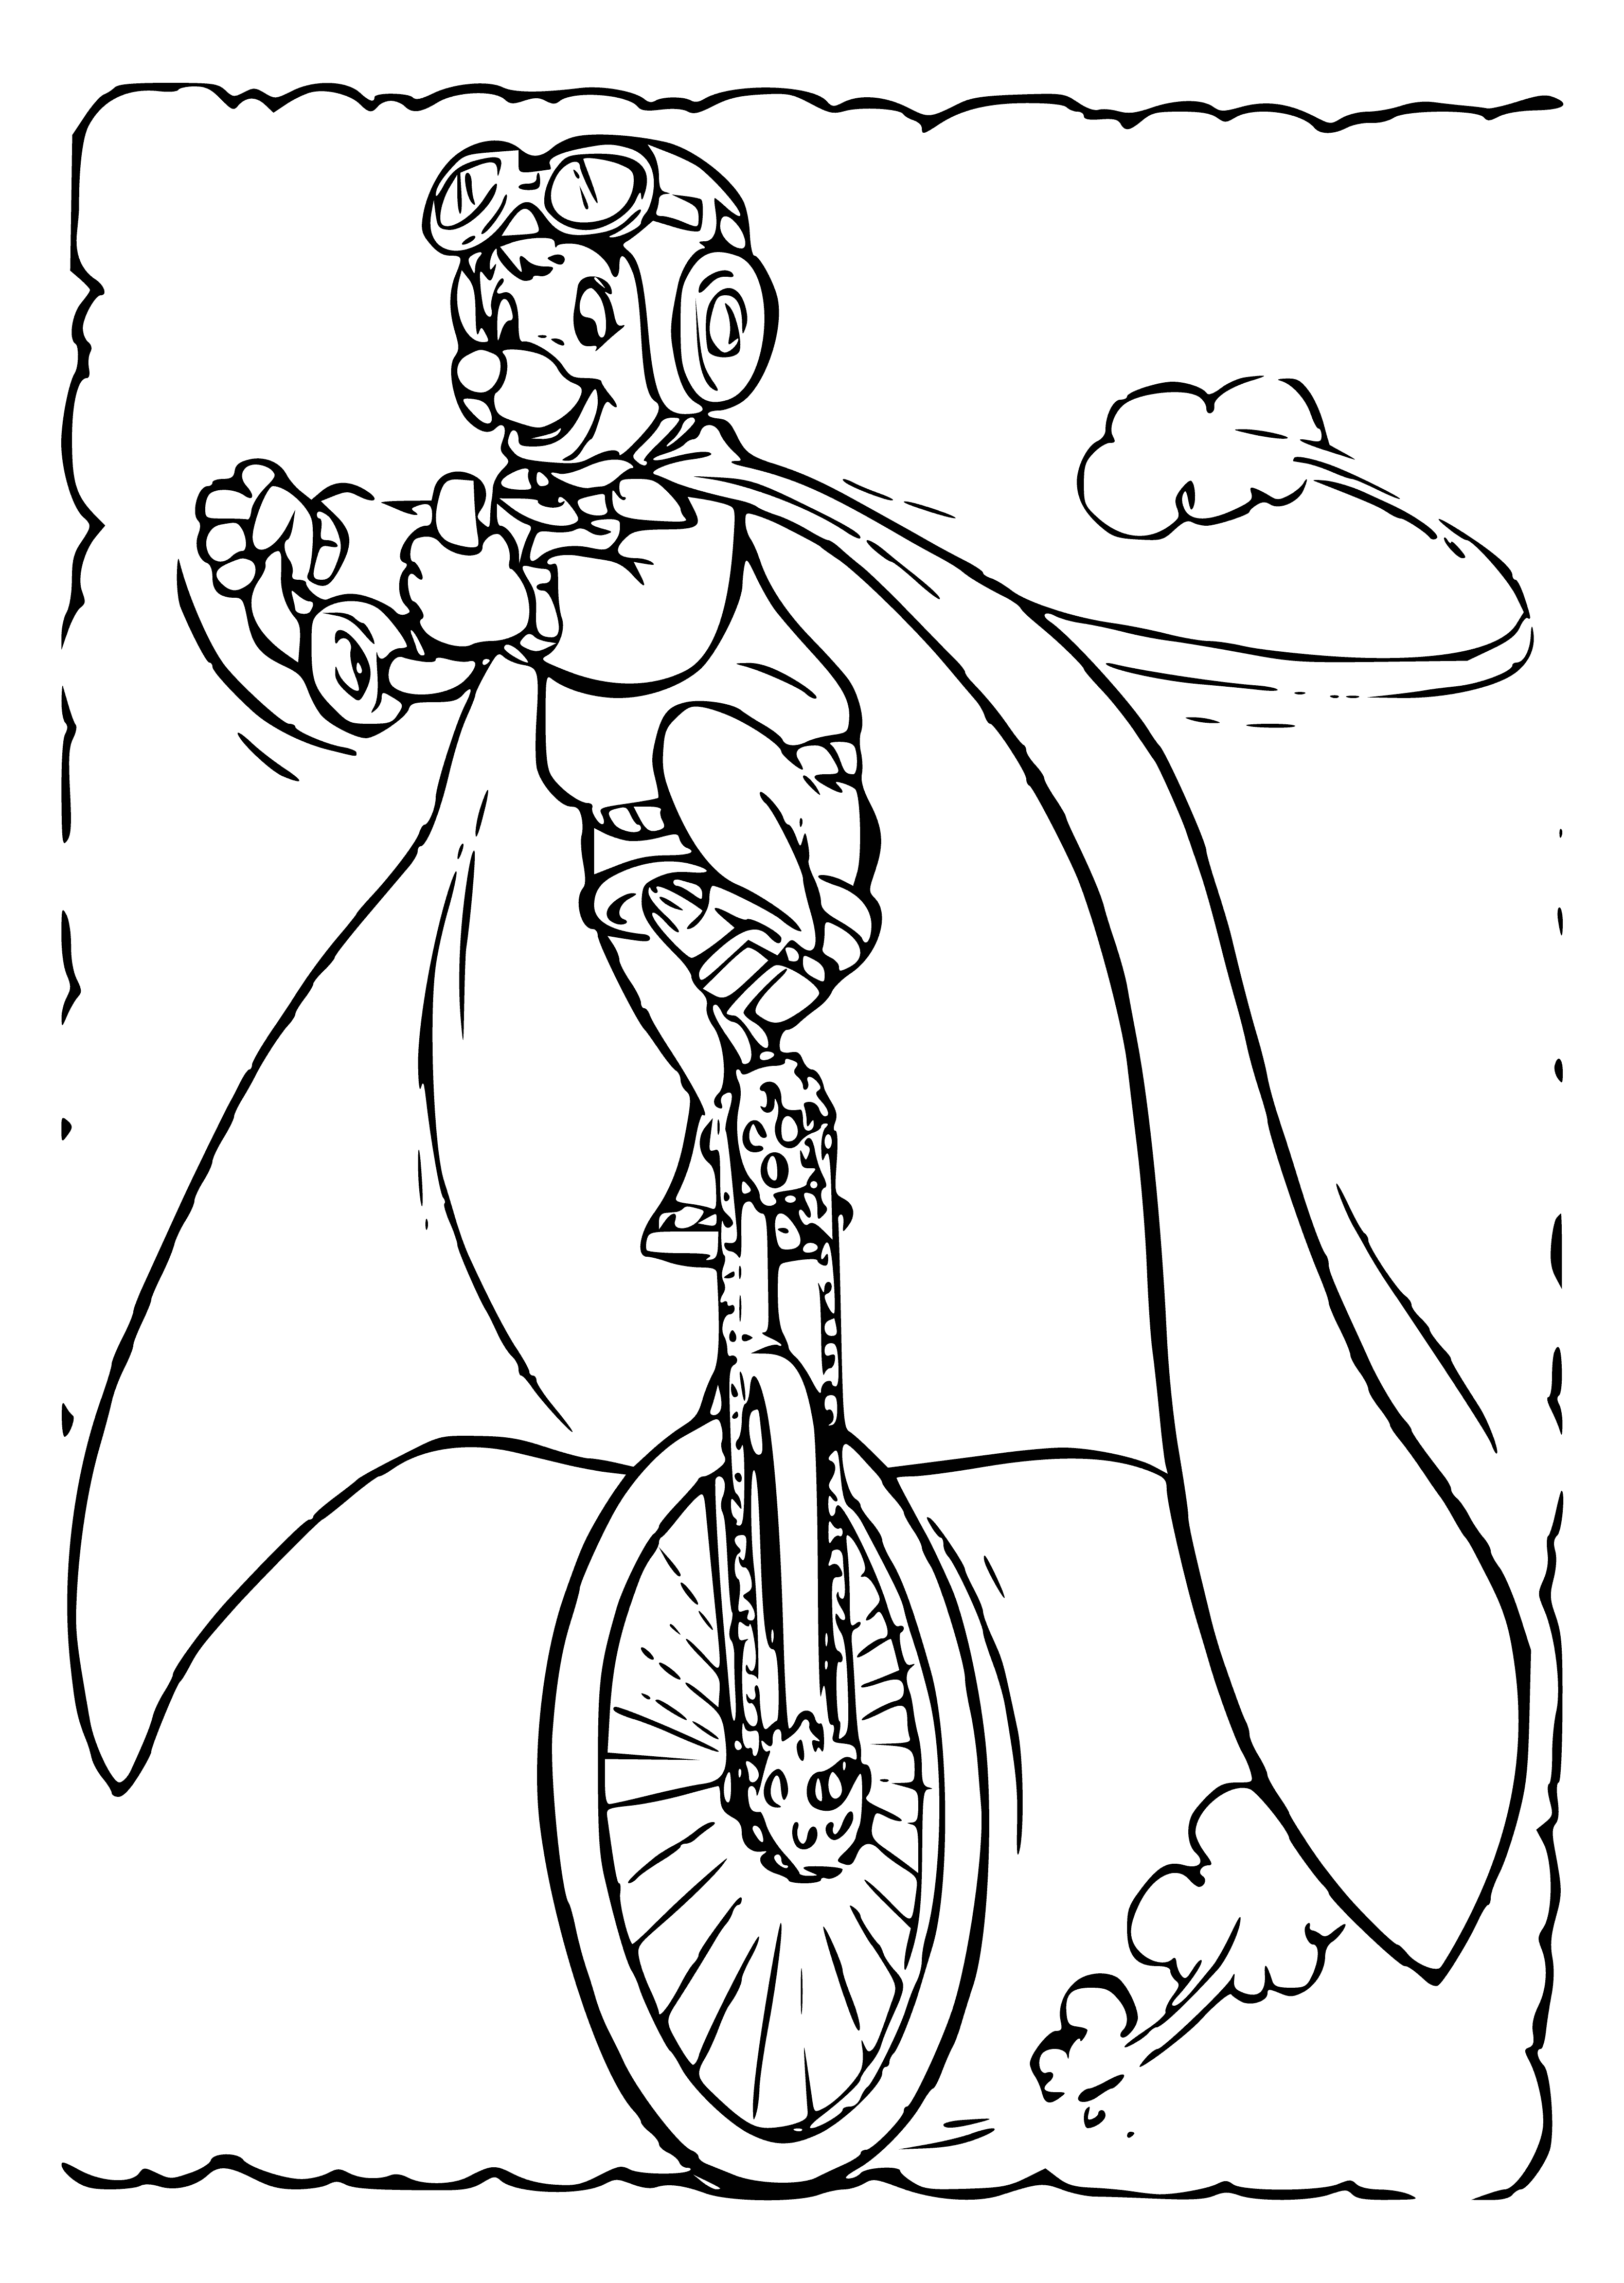 coloring page: Boy Keith catches big fish at windmill and is beaming with pride.